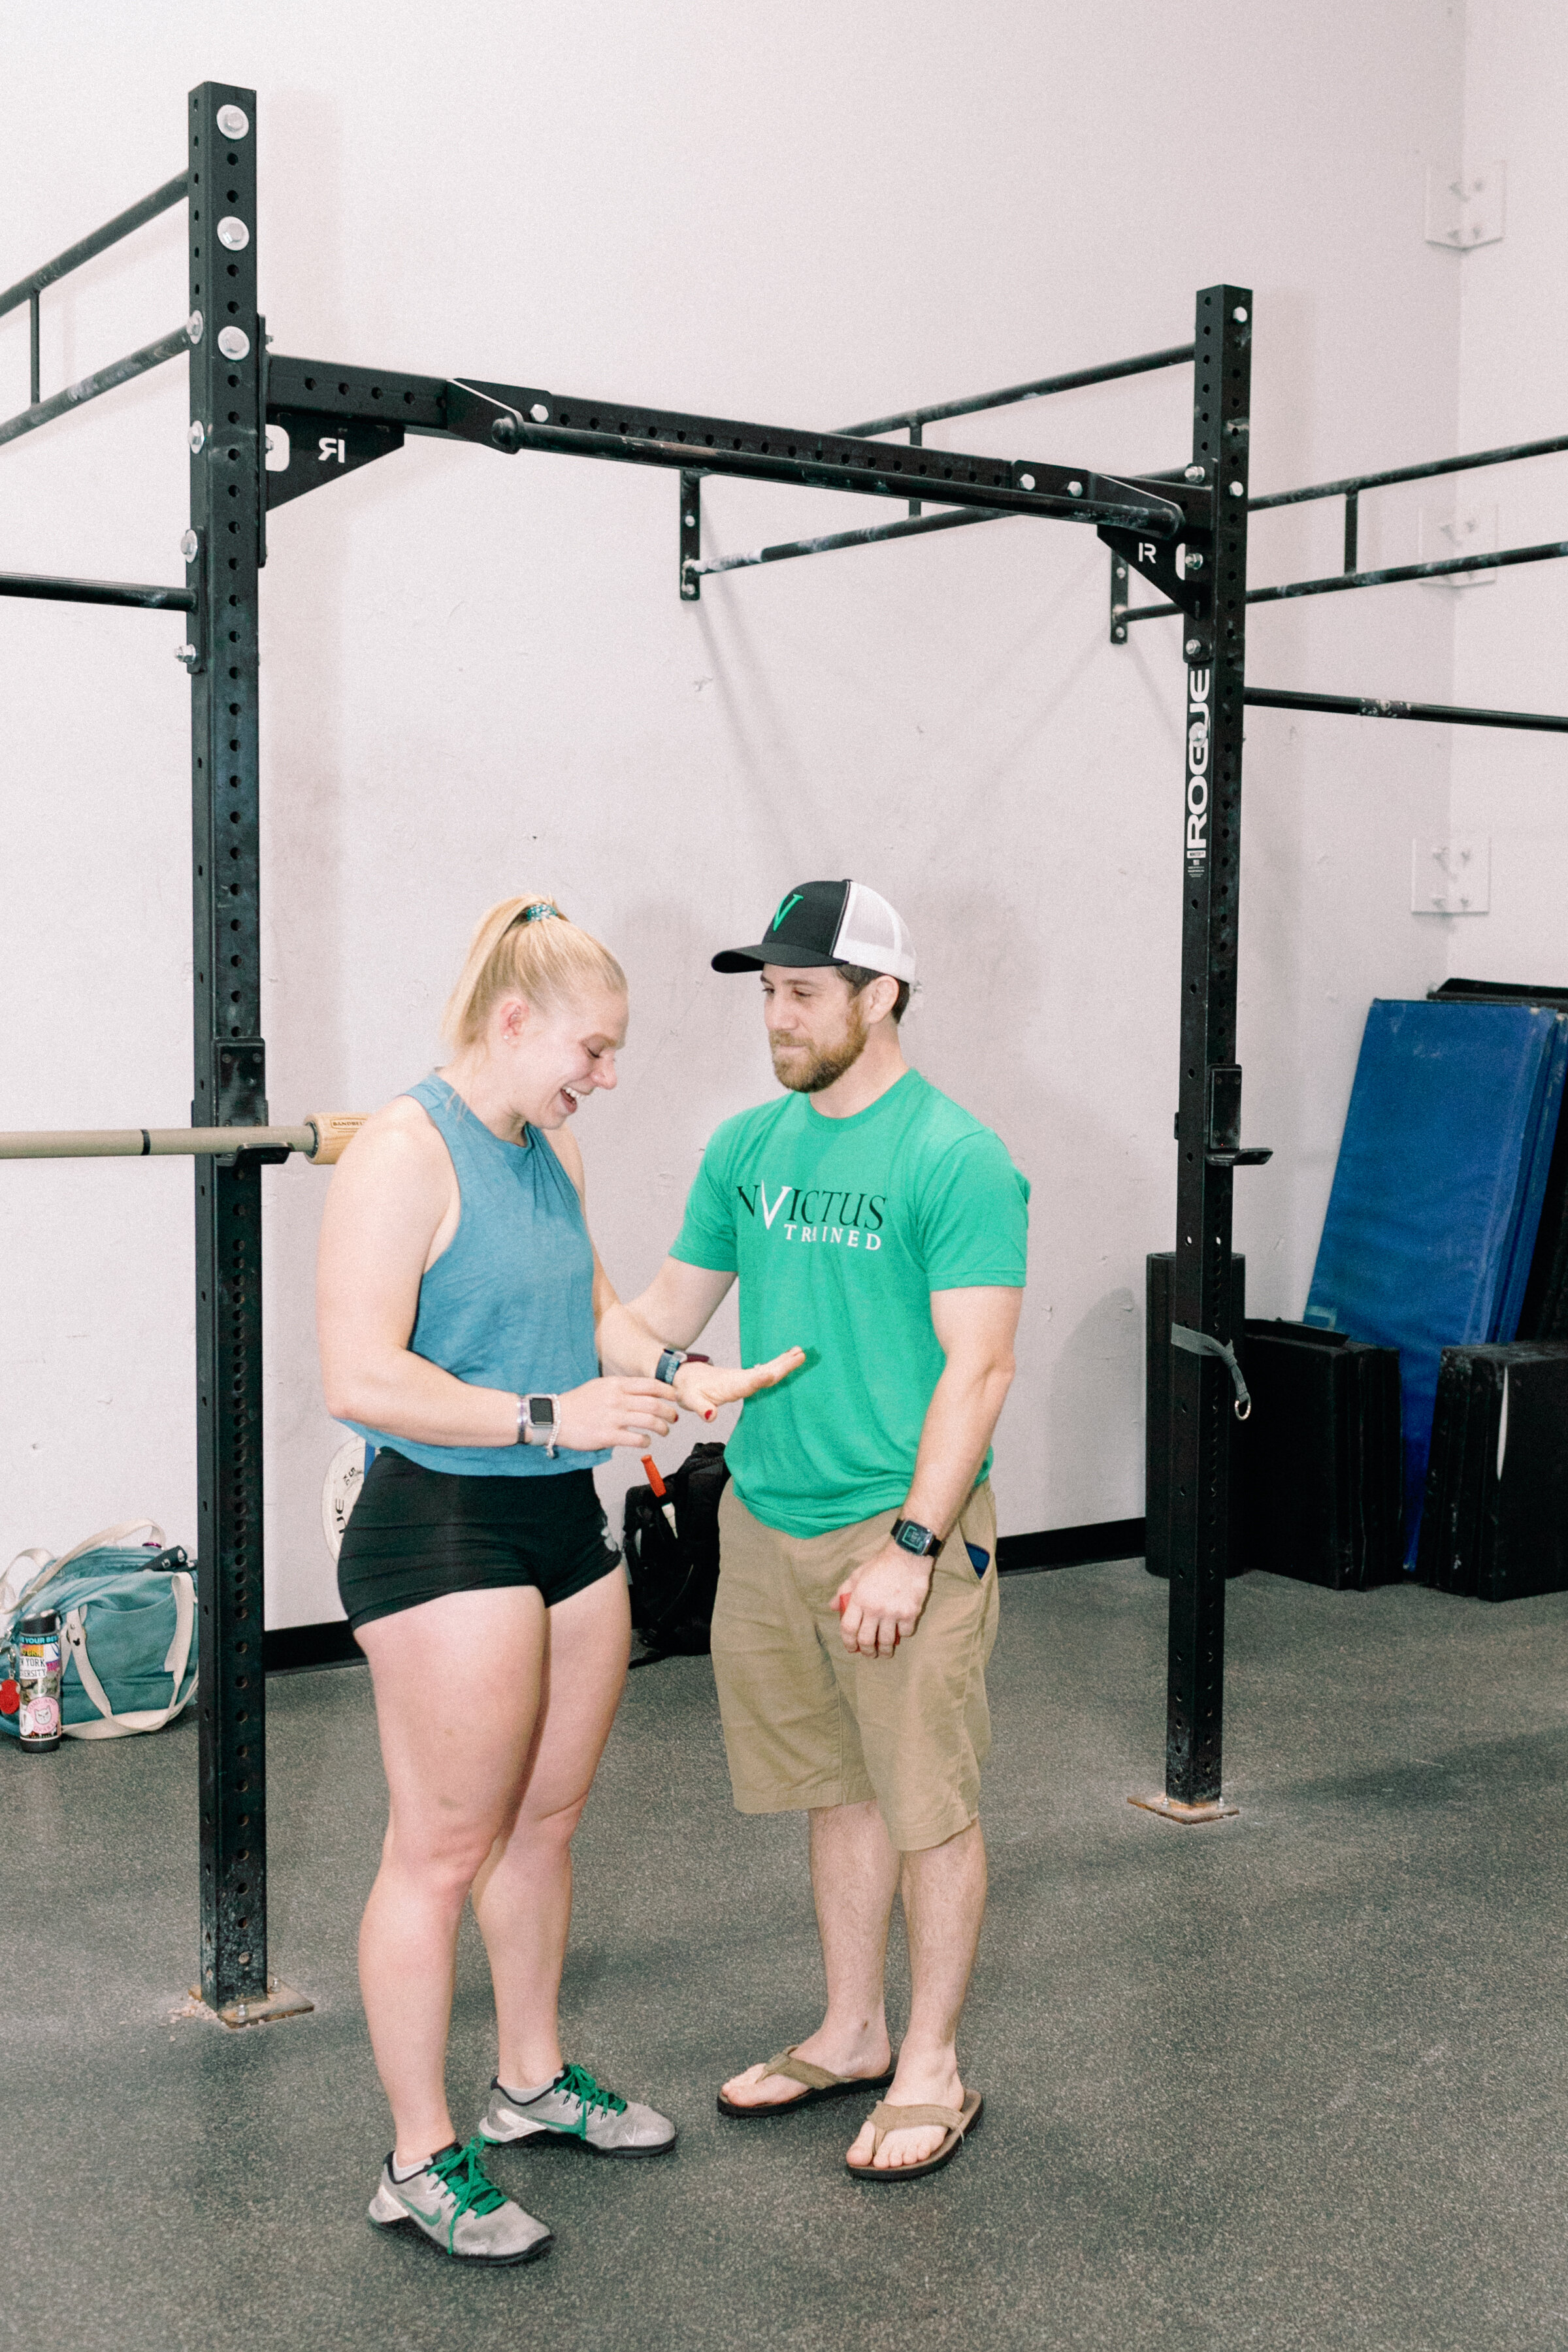 Colin and Ashlie's Surprise Proposal at Invictus Fitness-6.jpg